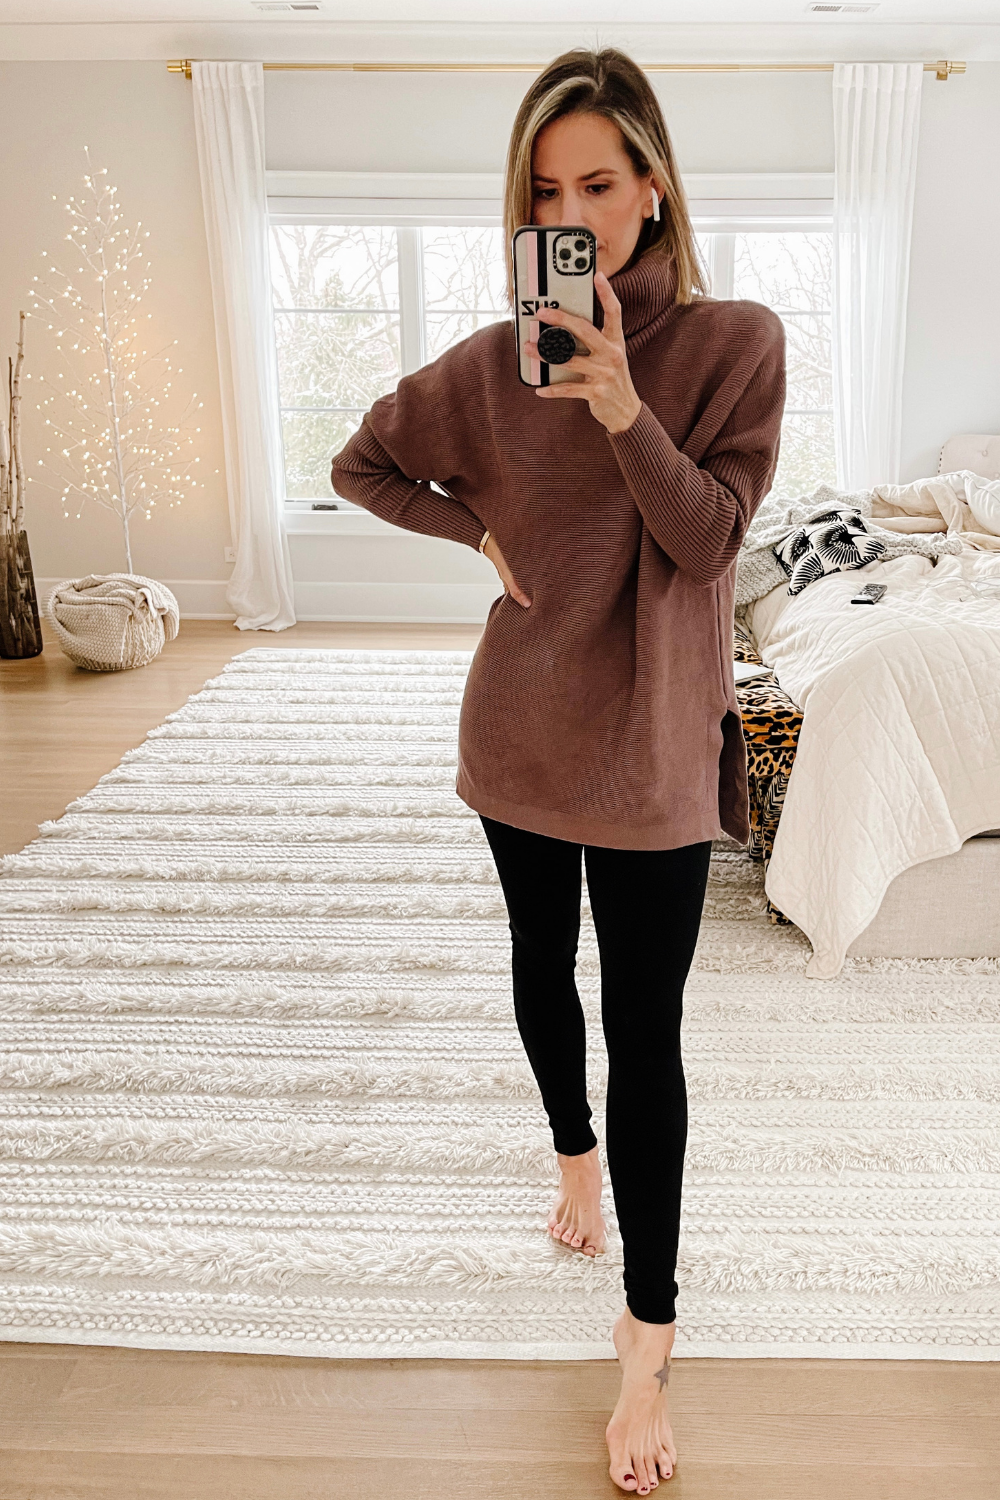 Suzanne wearing a tunic turtleneck and leggings